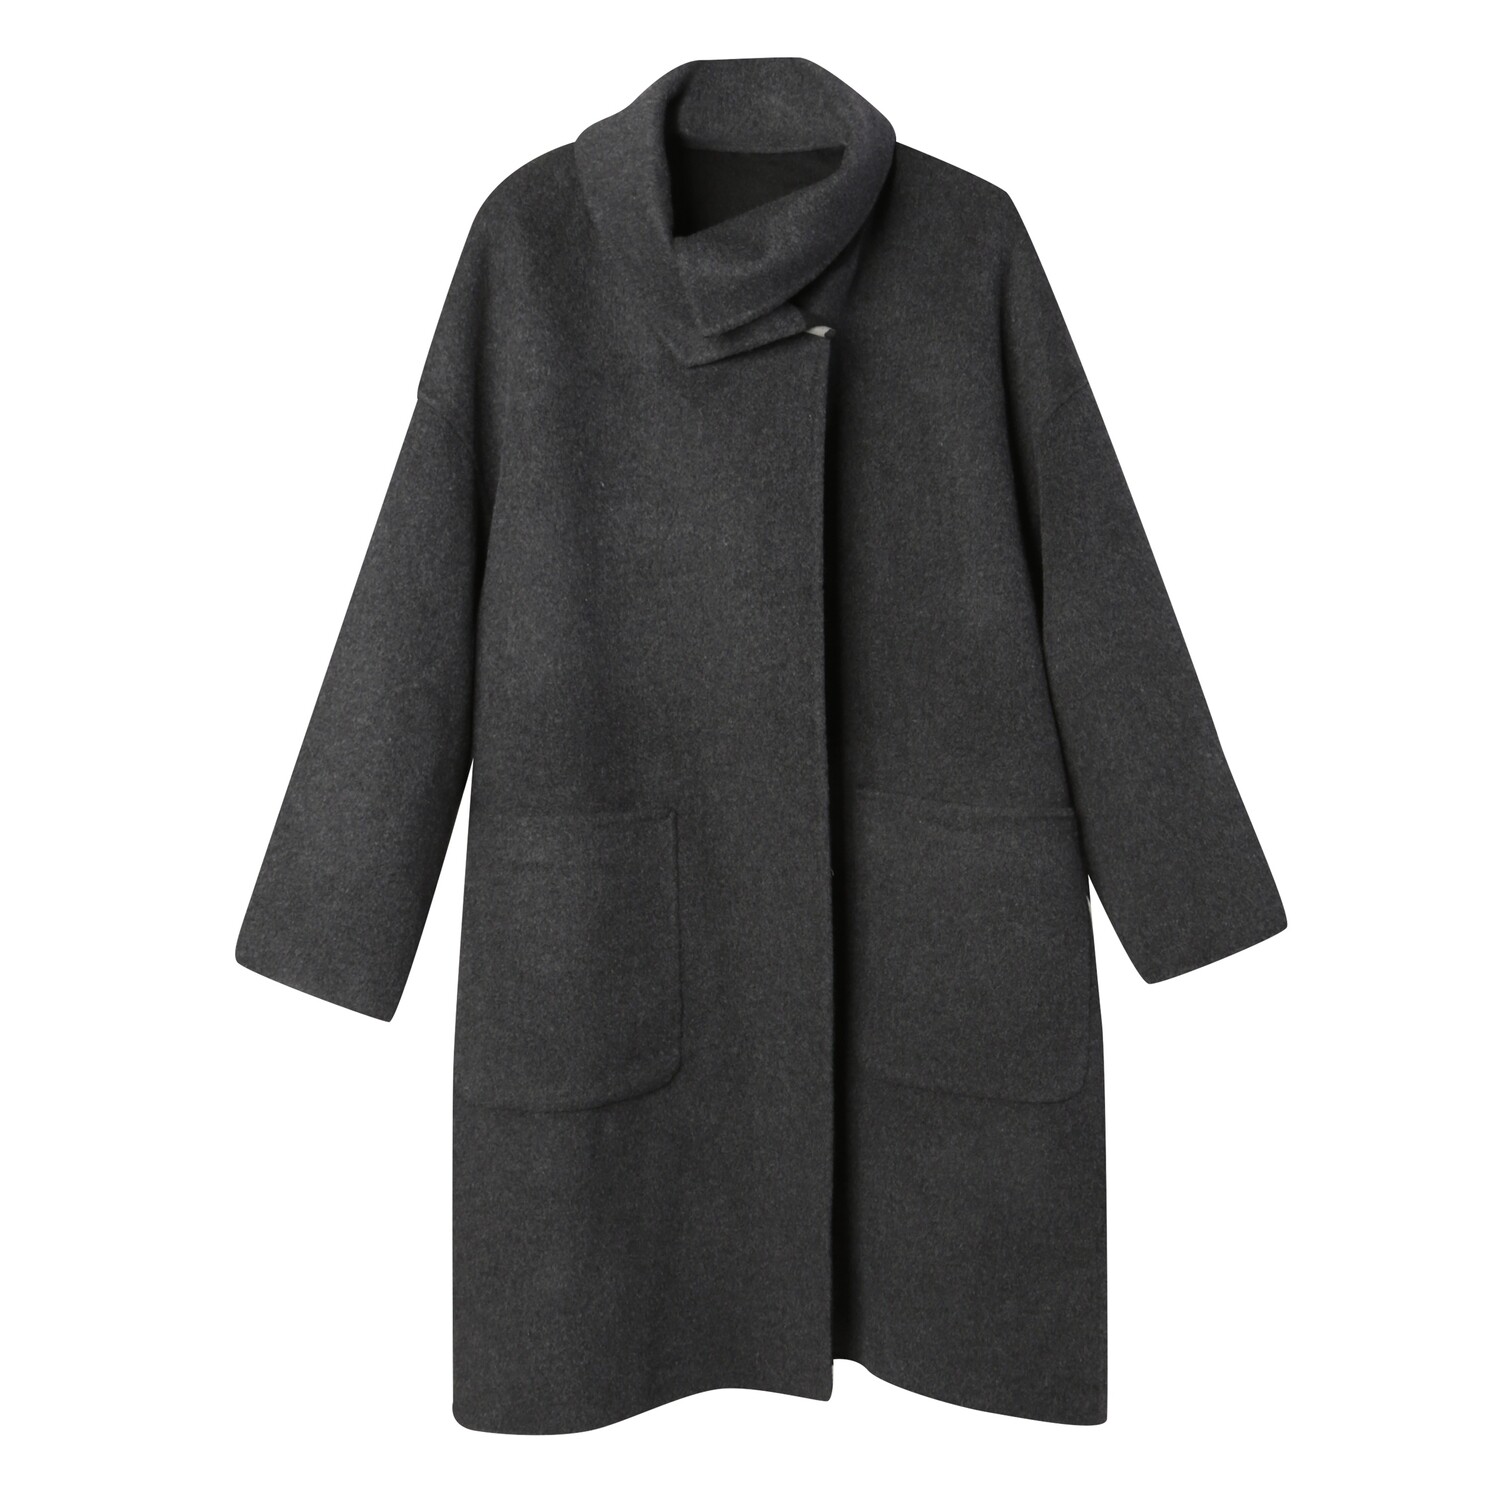 Retro Collar Oversize Cashmere Wool Mixed Double Faced Wool Coat ...